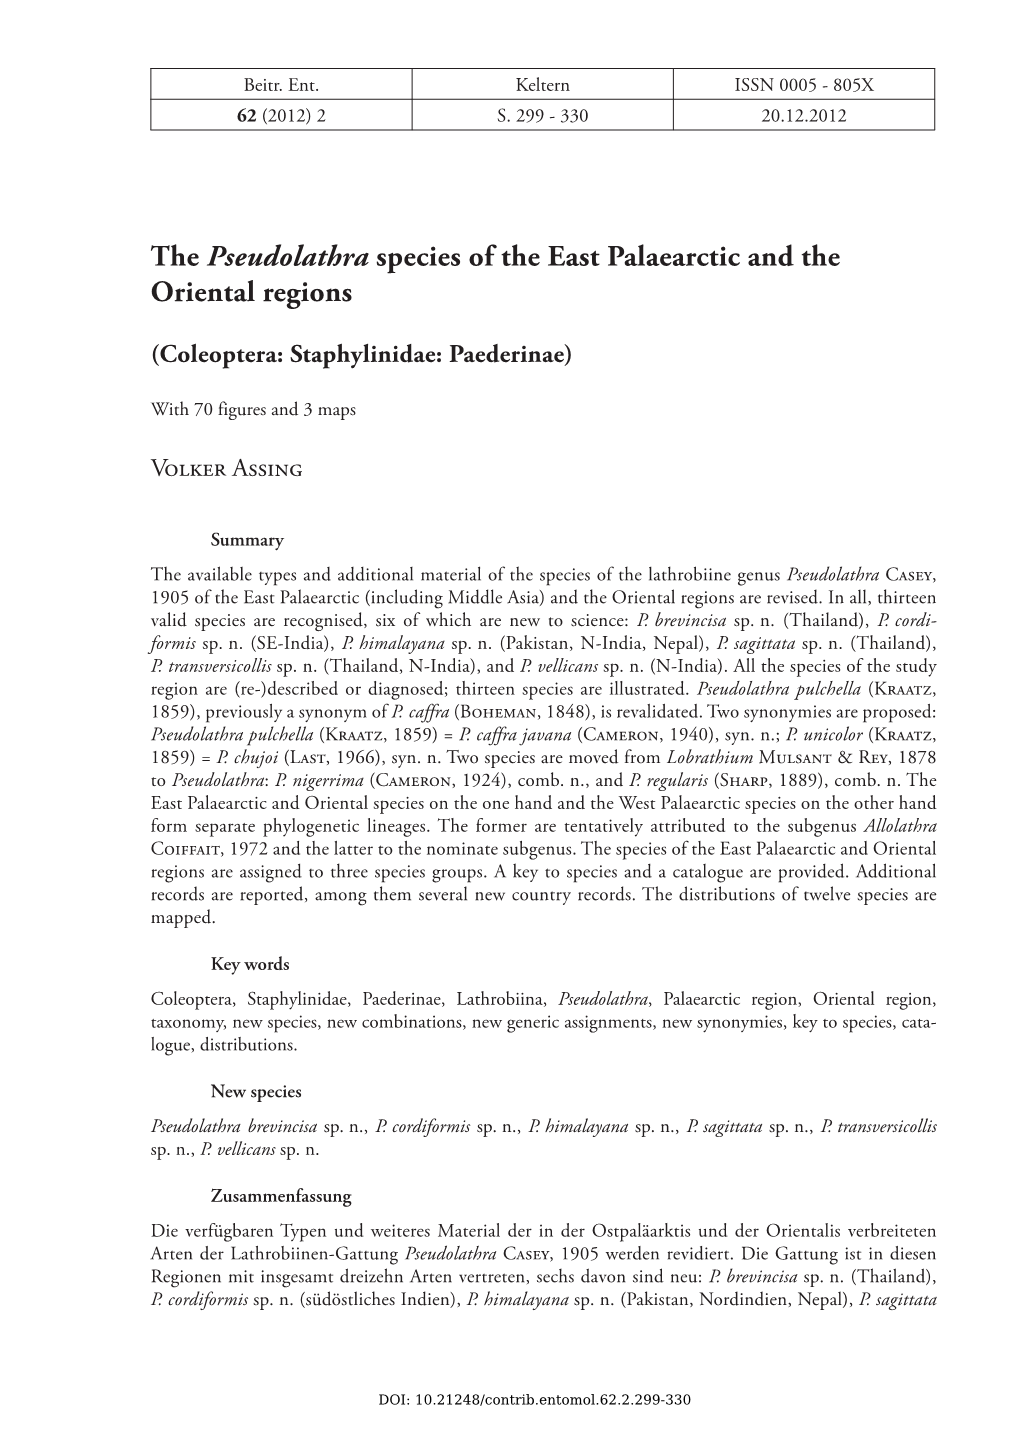 The Pseudolathra Species of the East Palaearctic and the Oriental Regions